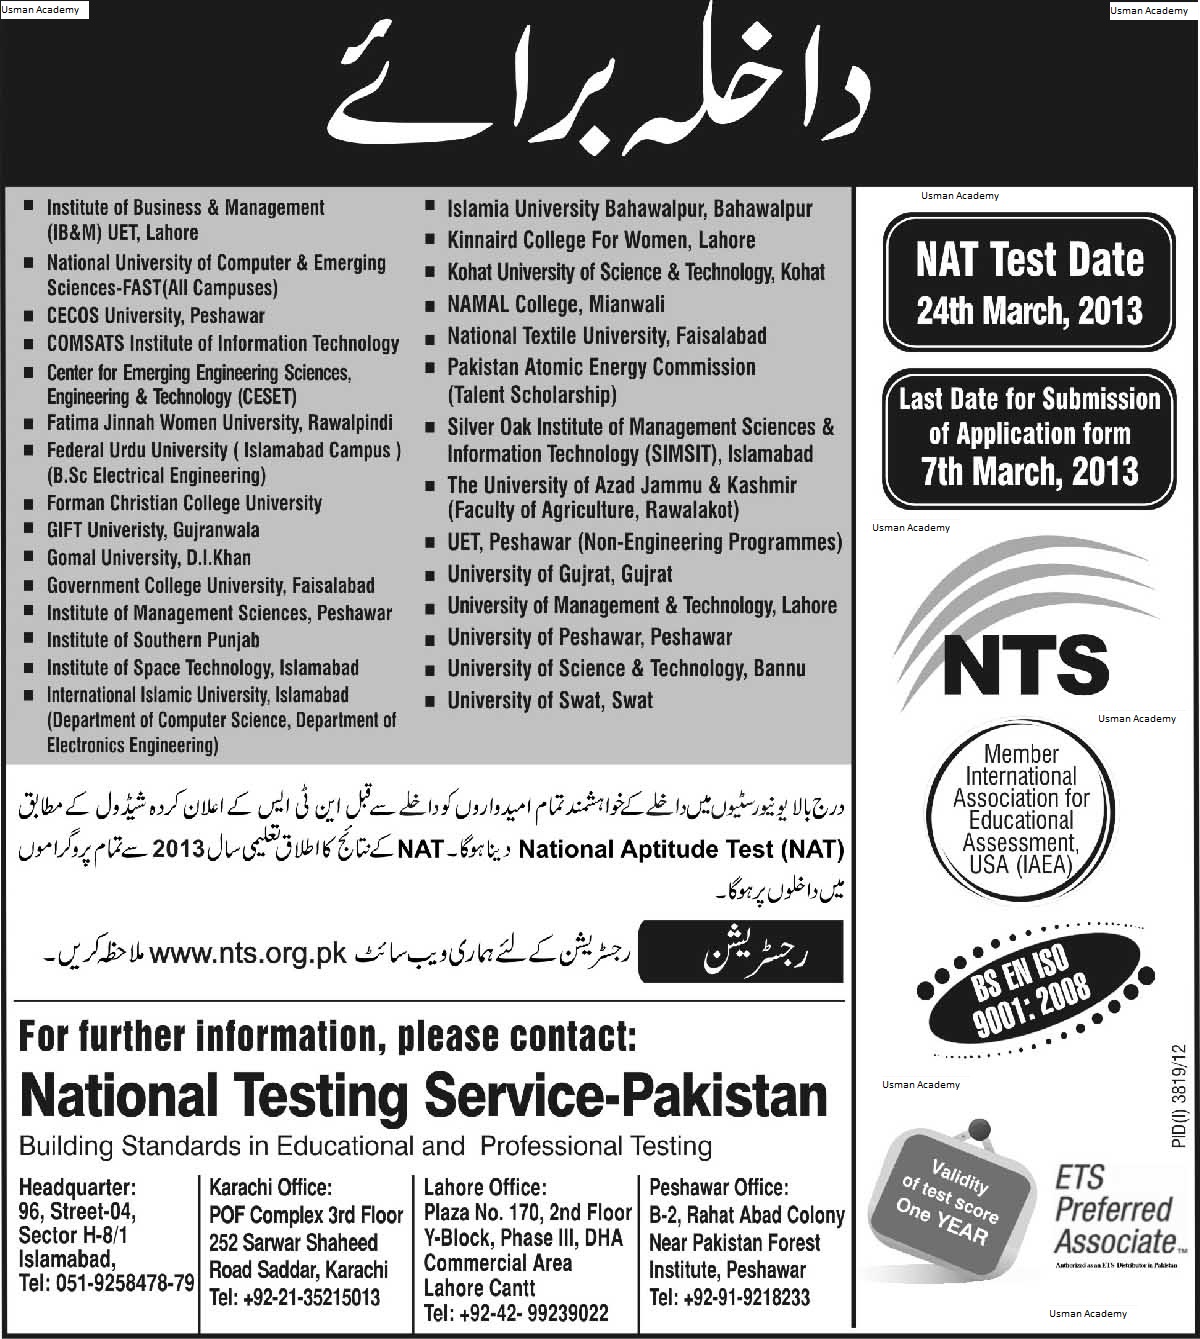 nts-nat-test-admissions-for-universities-2020-in-pakistan